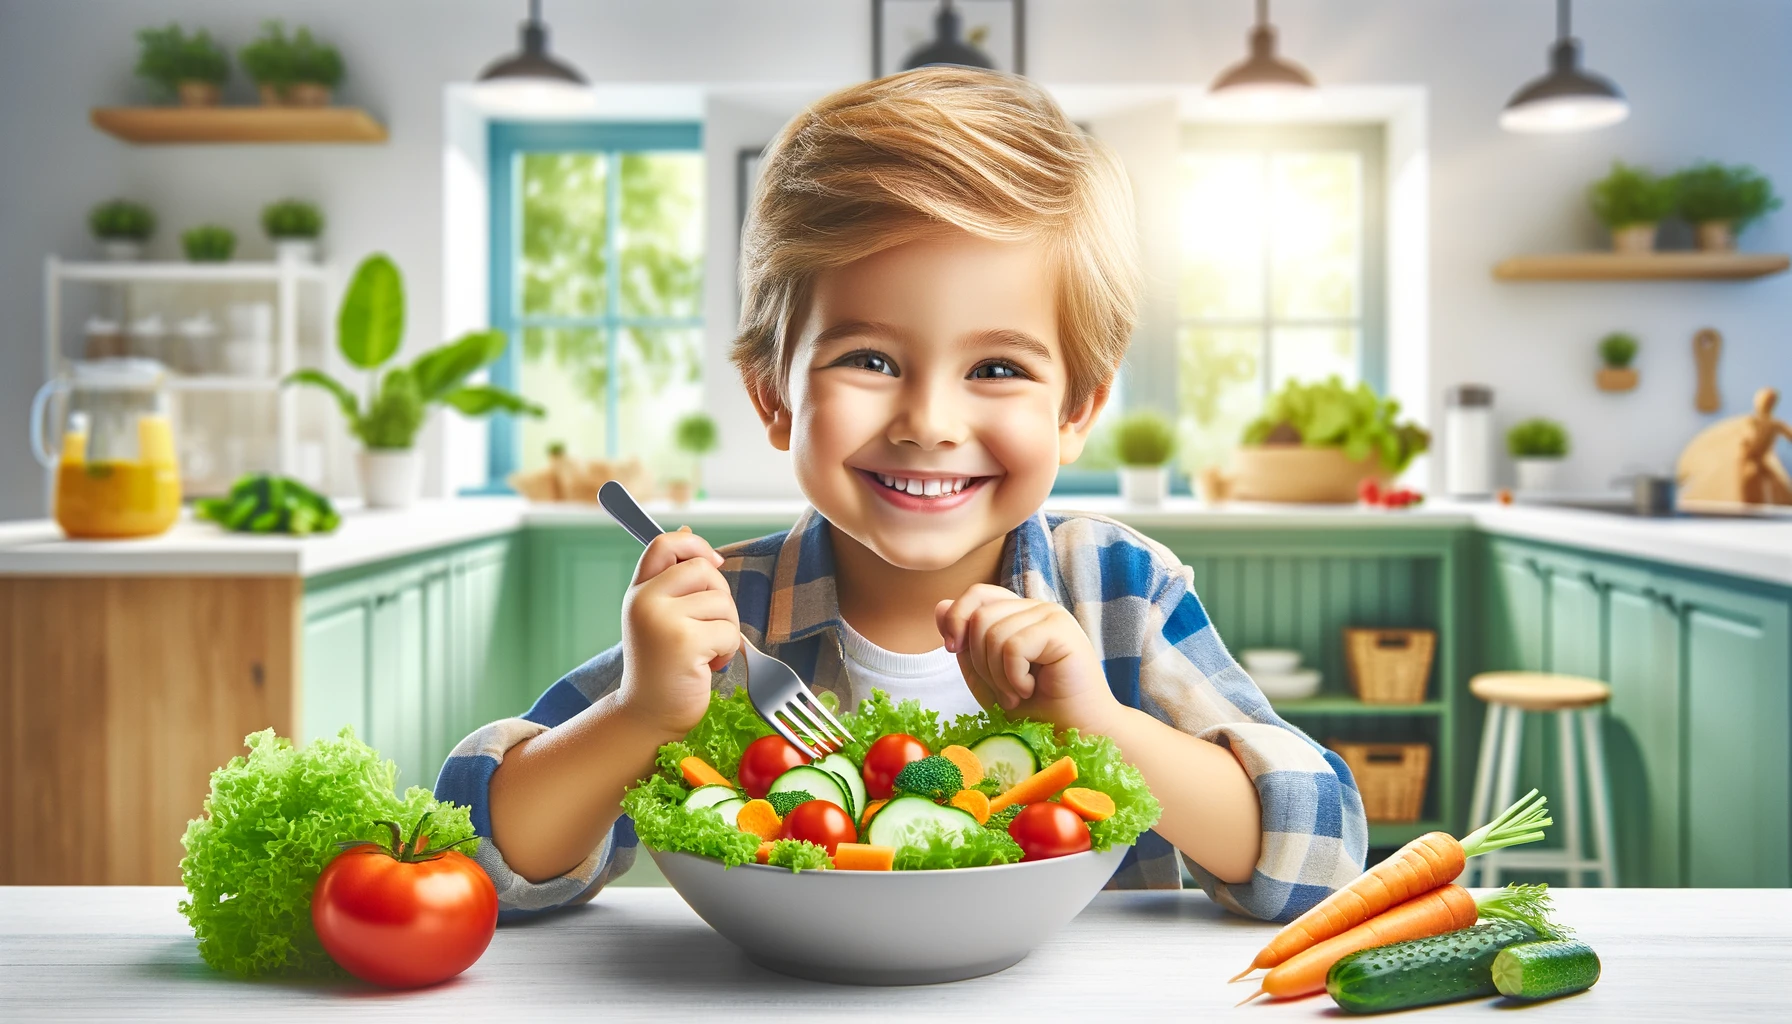 A young child happily eating a colorful salad filled with a variety of vegetables such as tomatoes carrots and lettuce at a brightly lit kitchen